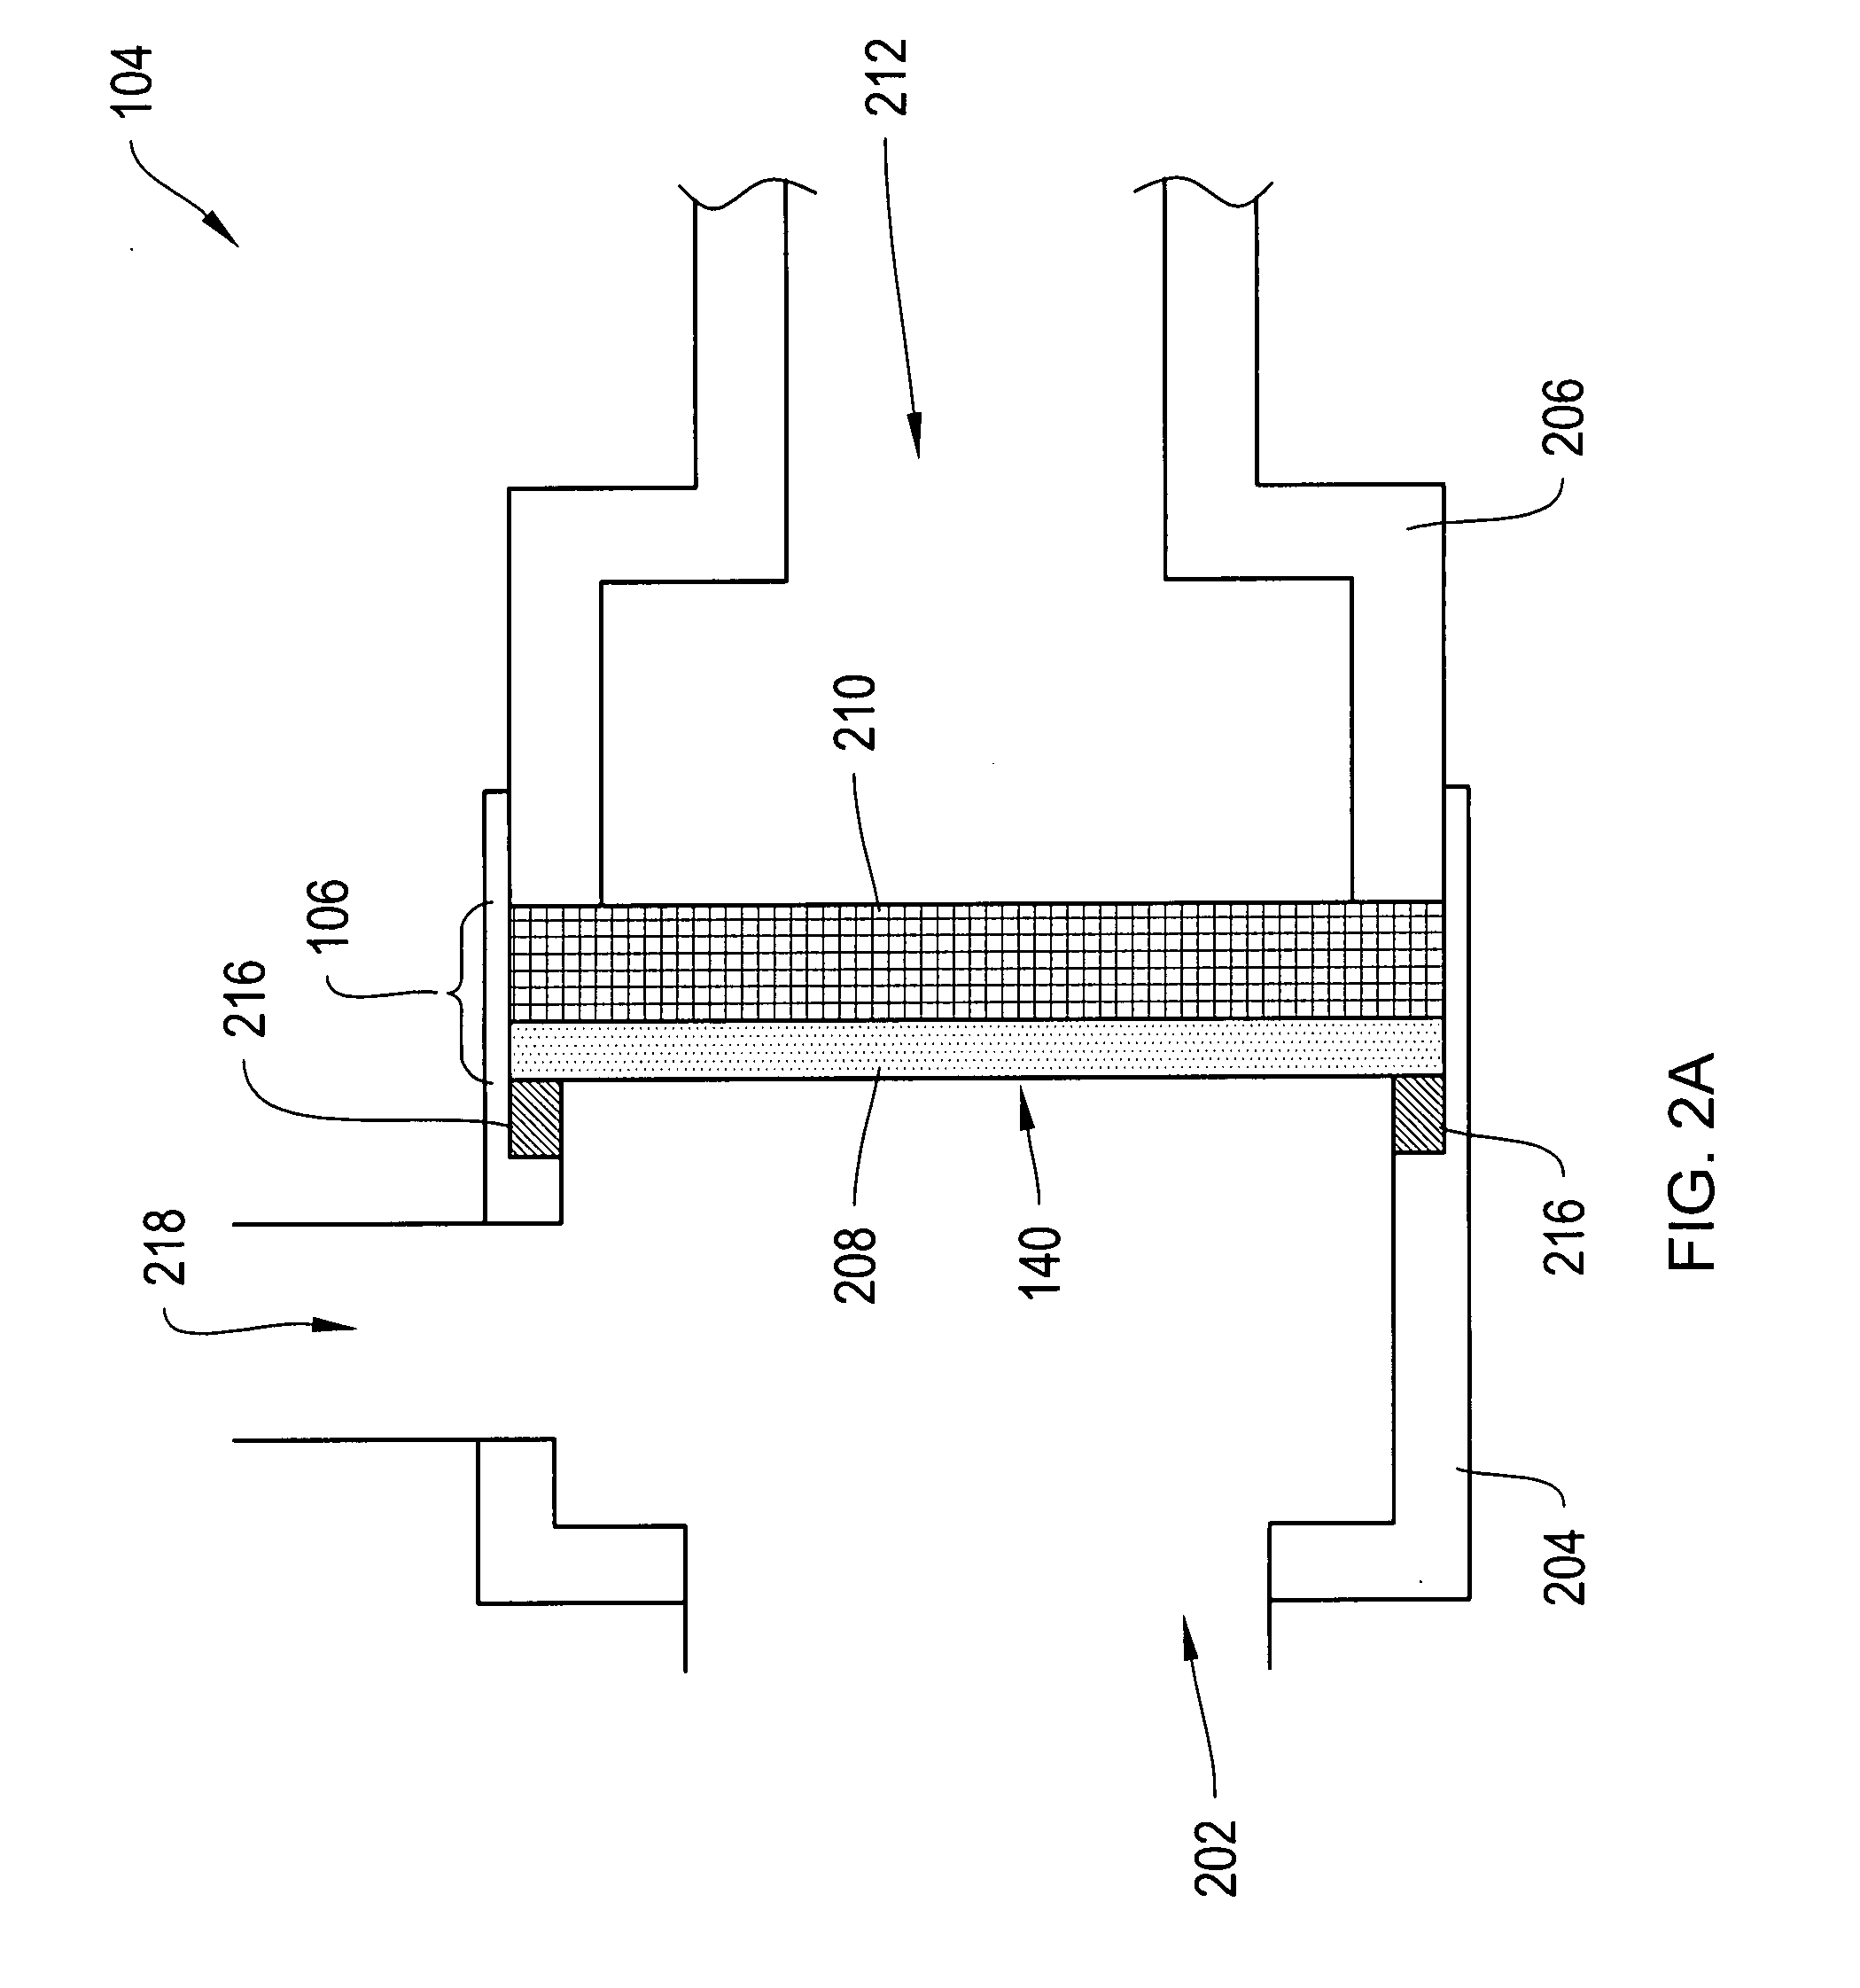 Systems and methods for analyzing underwater, subsurface and atmospheric environments